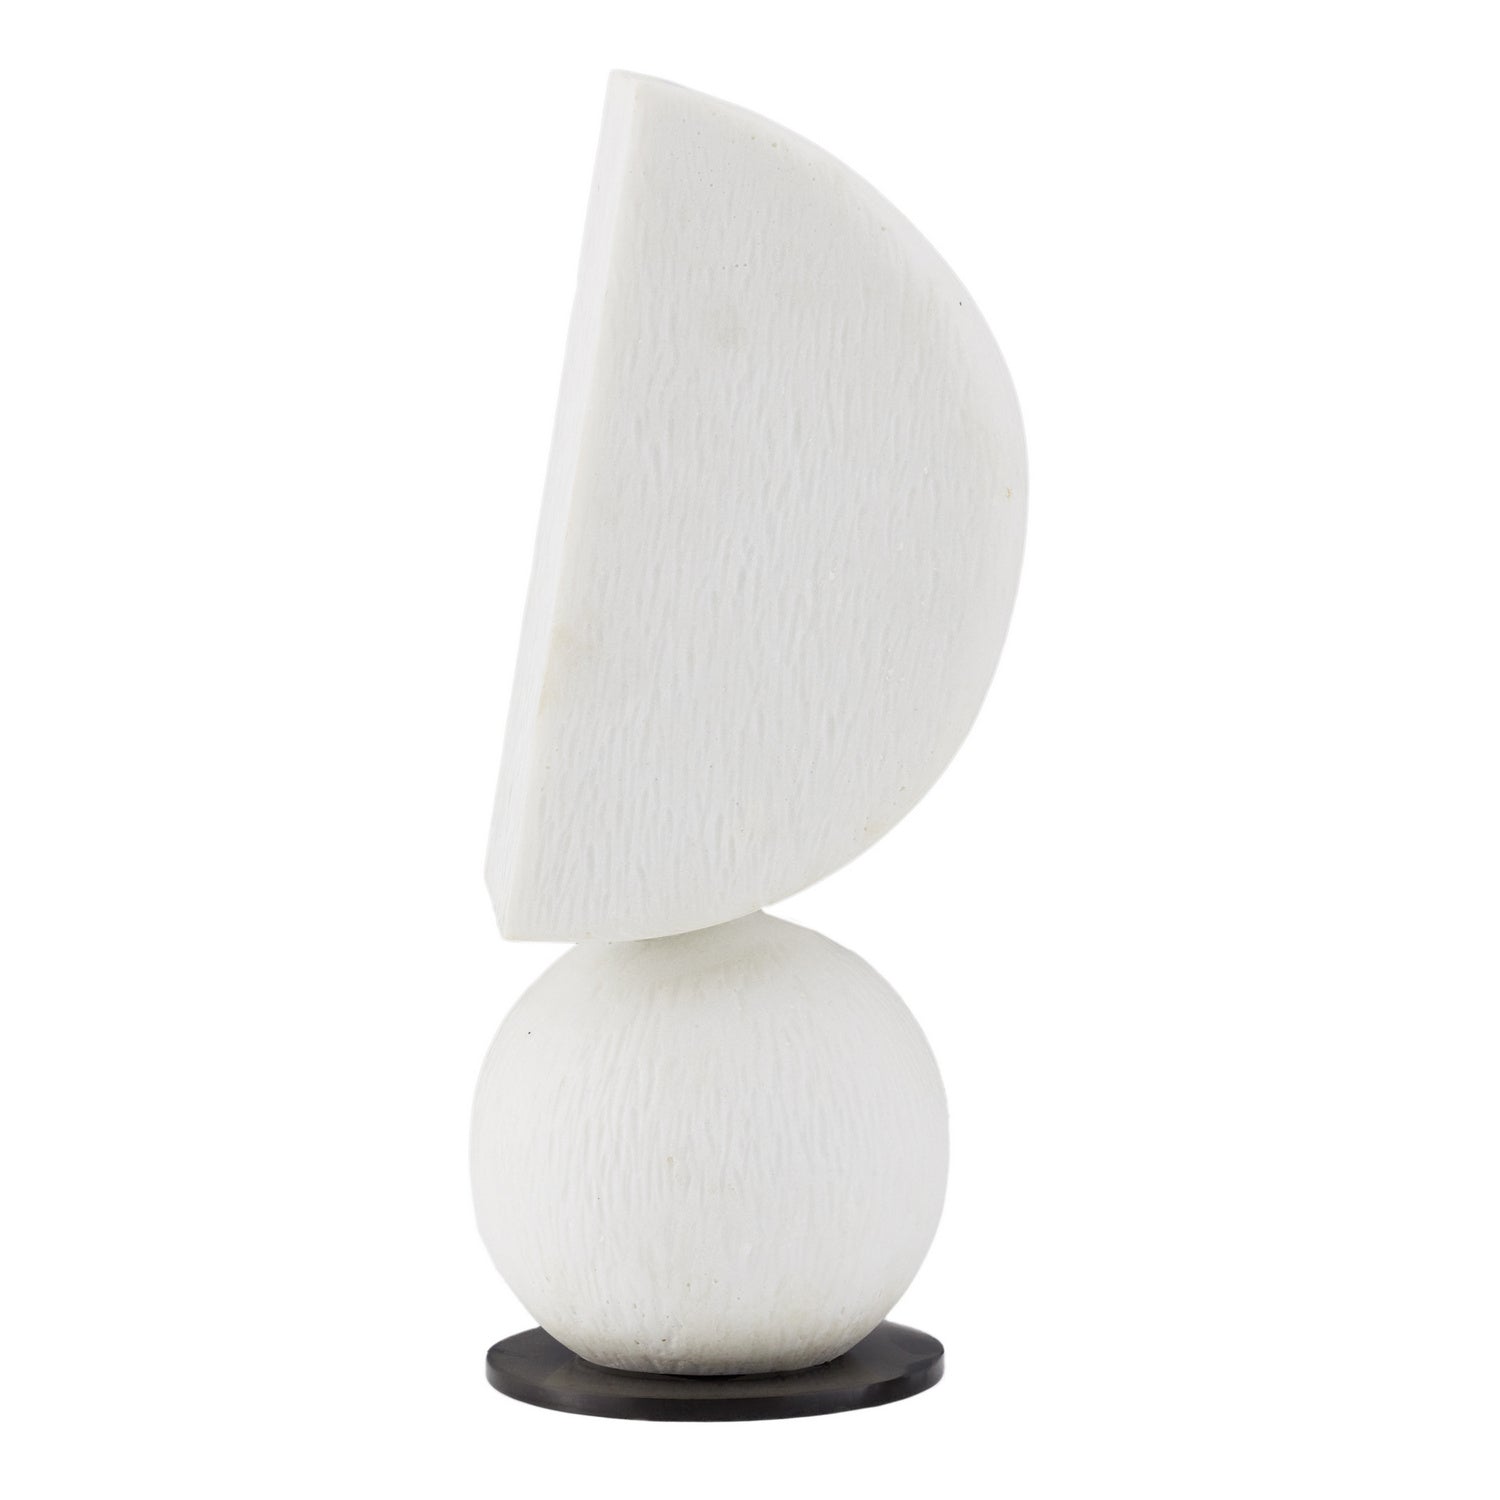 Sculpture from the Ponyo collection in Ivory finish